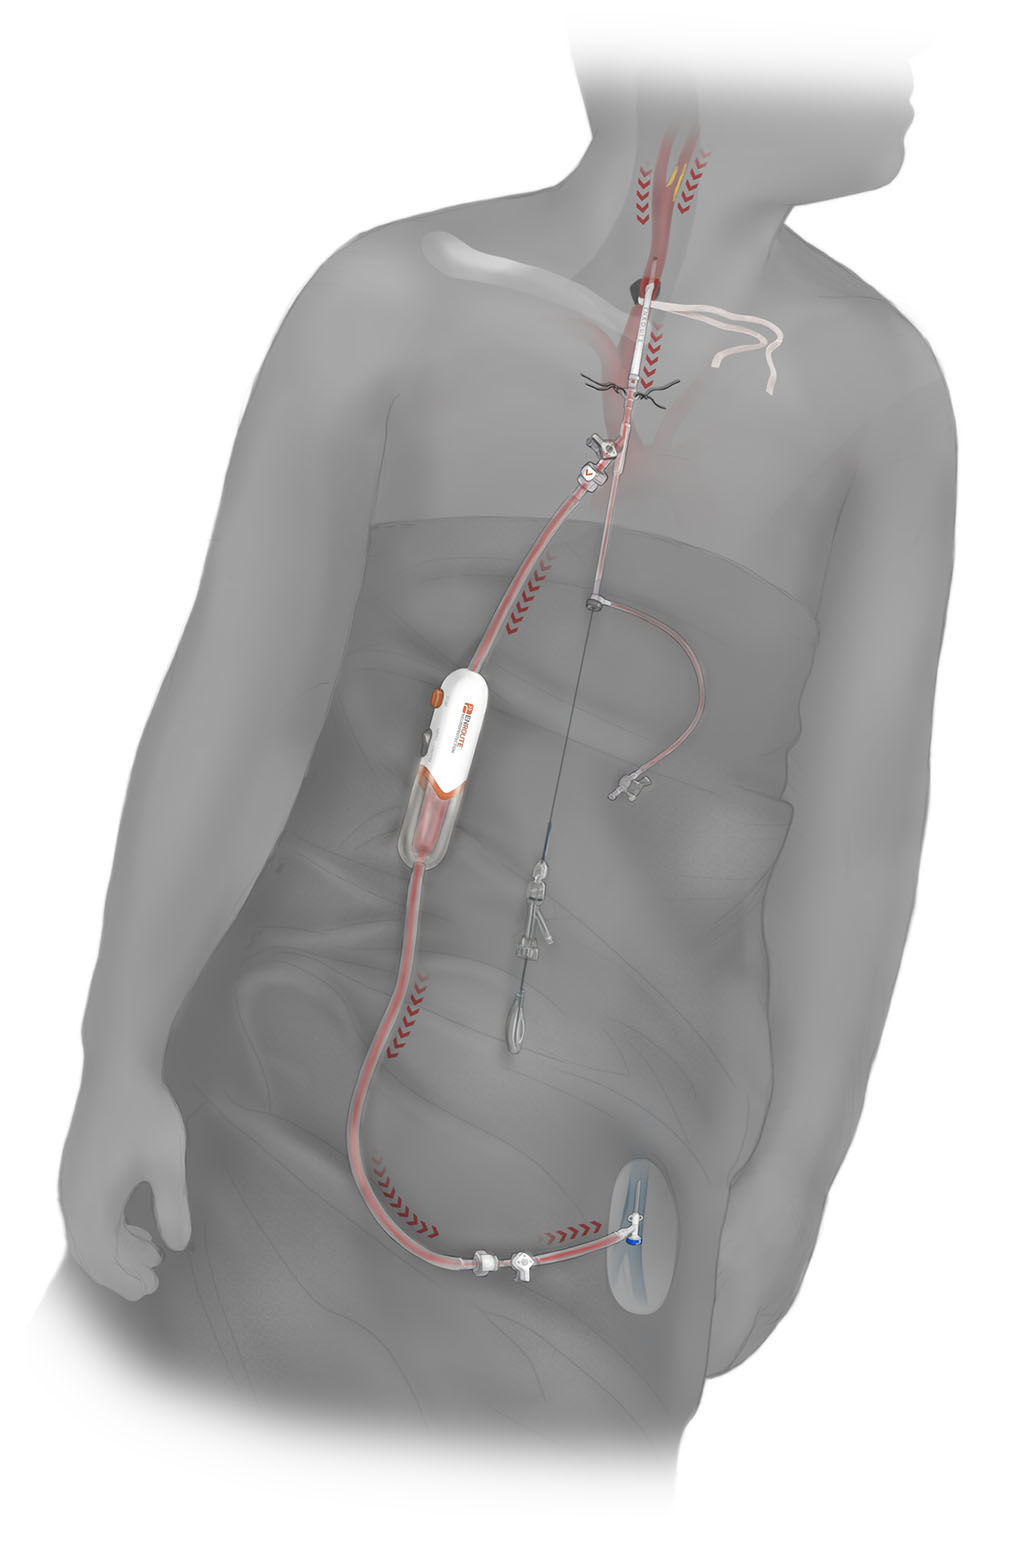 human body circulatory system in which SCMSC specialists perform an angiogram procedure